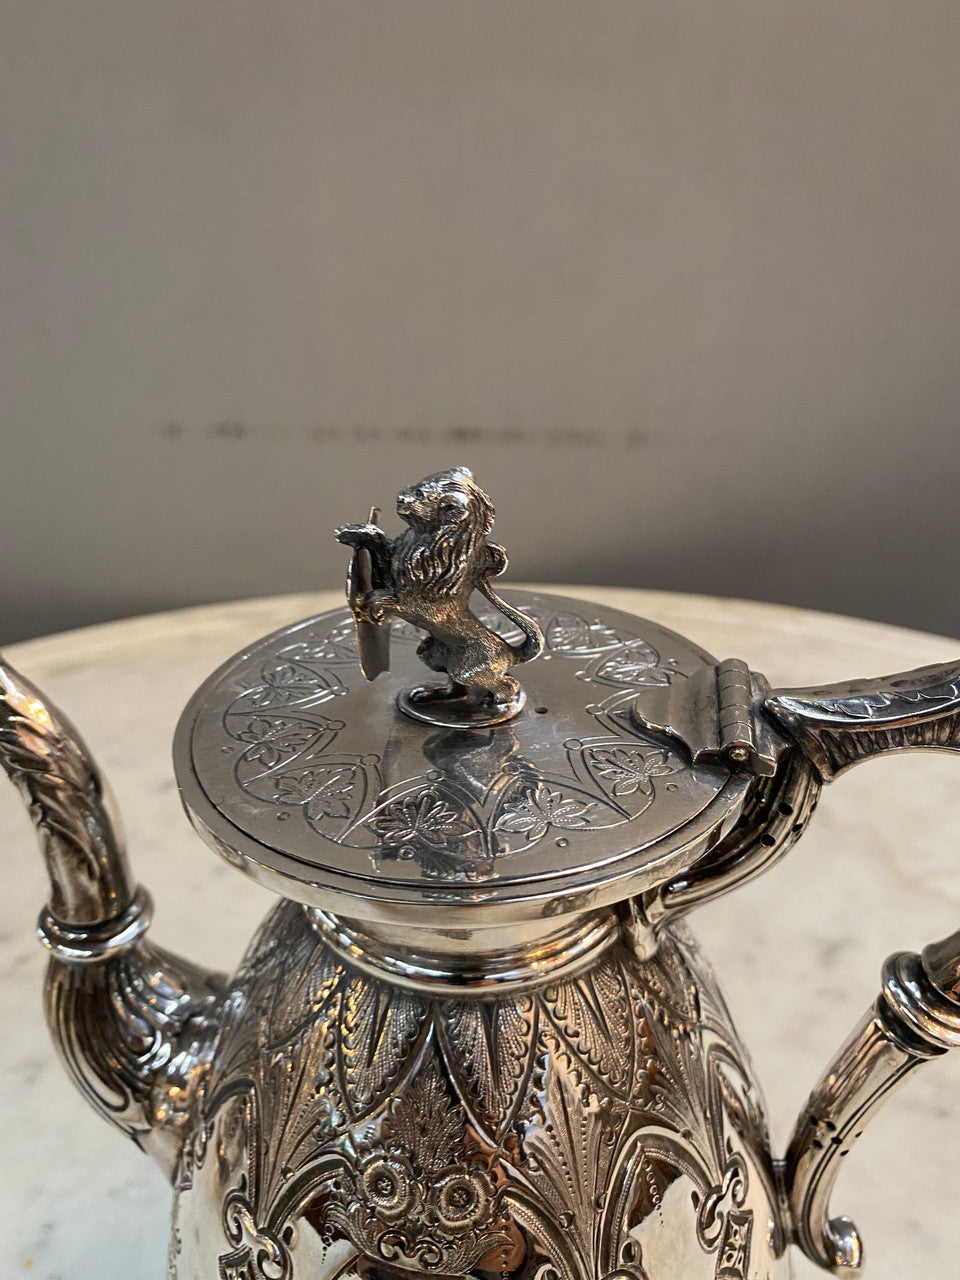 Amazing Quality Sheffield Plate Tea & Coffee Service By Walker & Hall
Gorgeous heavy quality Sheffield plate, tea & coffee service with lion finials.
The set is of the highest quality & has beautiful fine chasing & repoosse work. In very good original condition